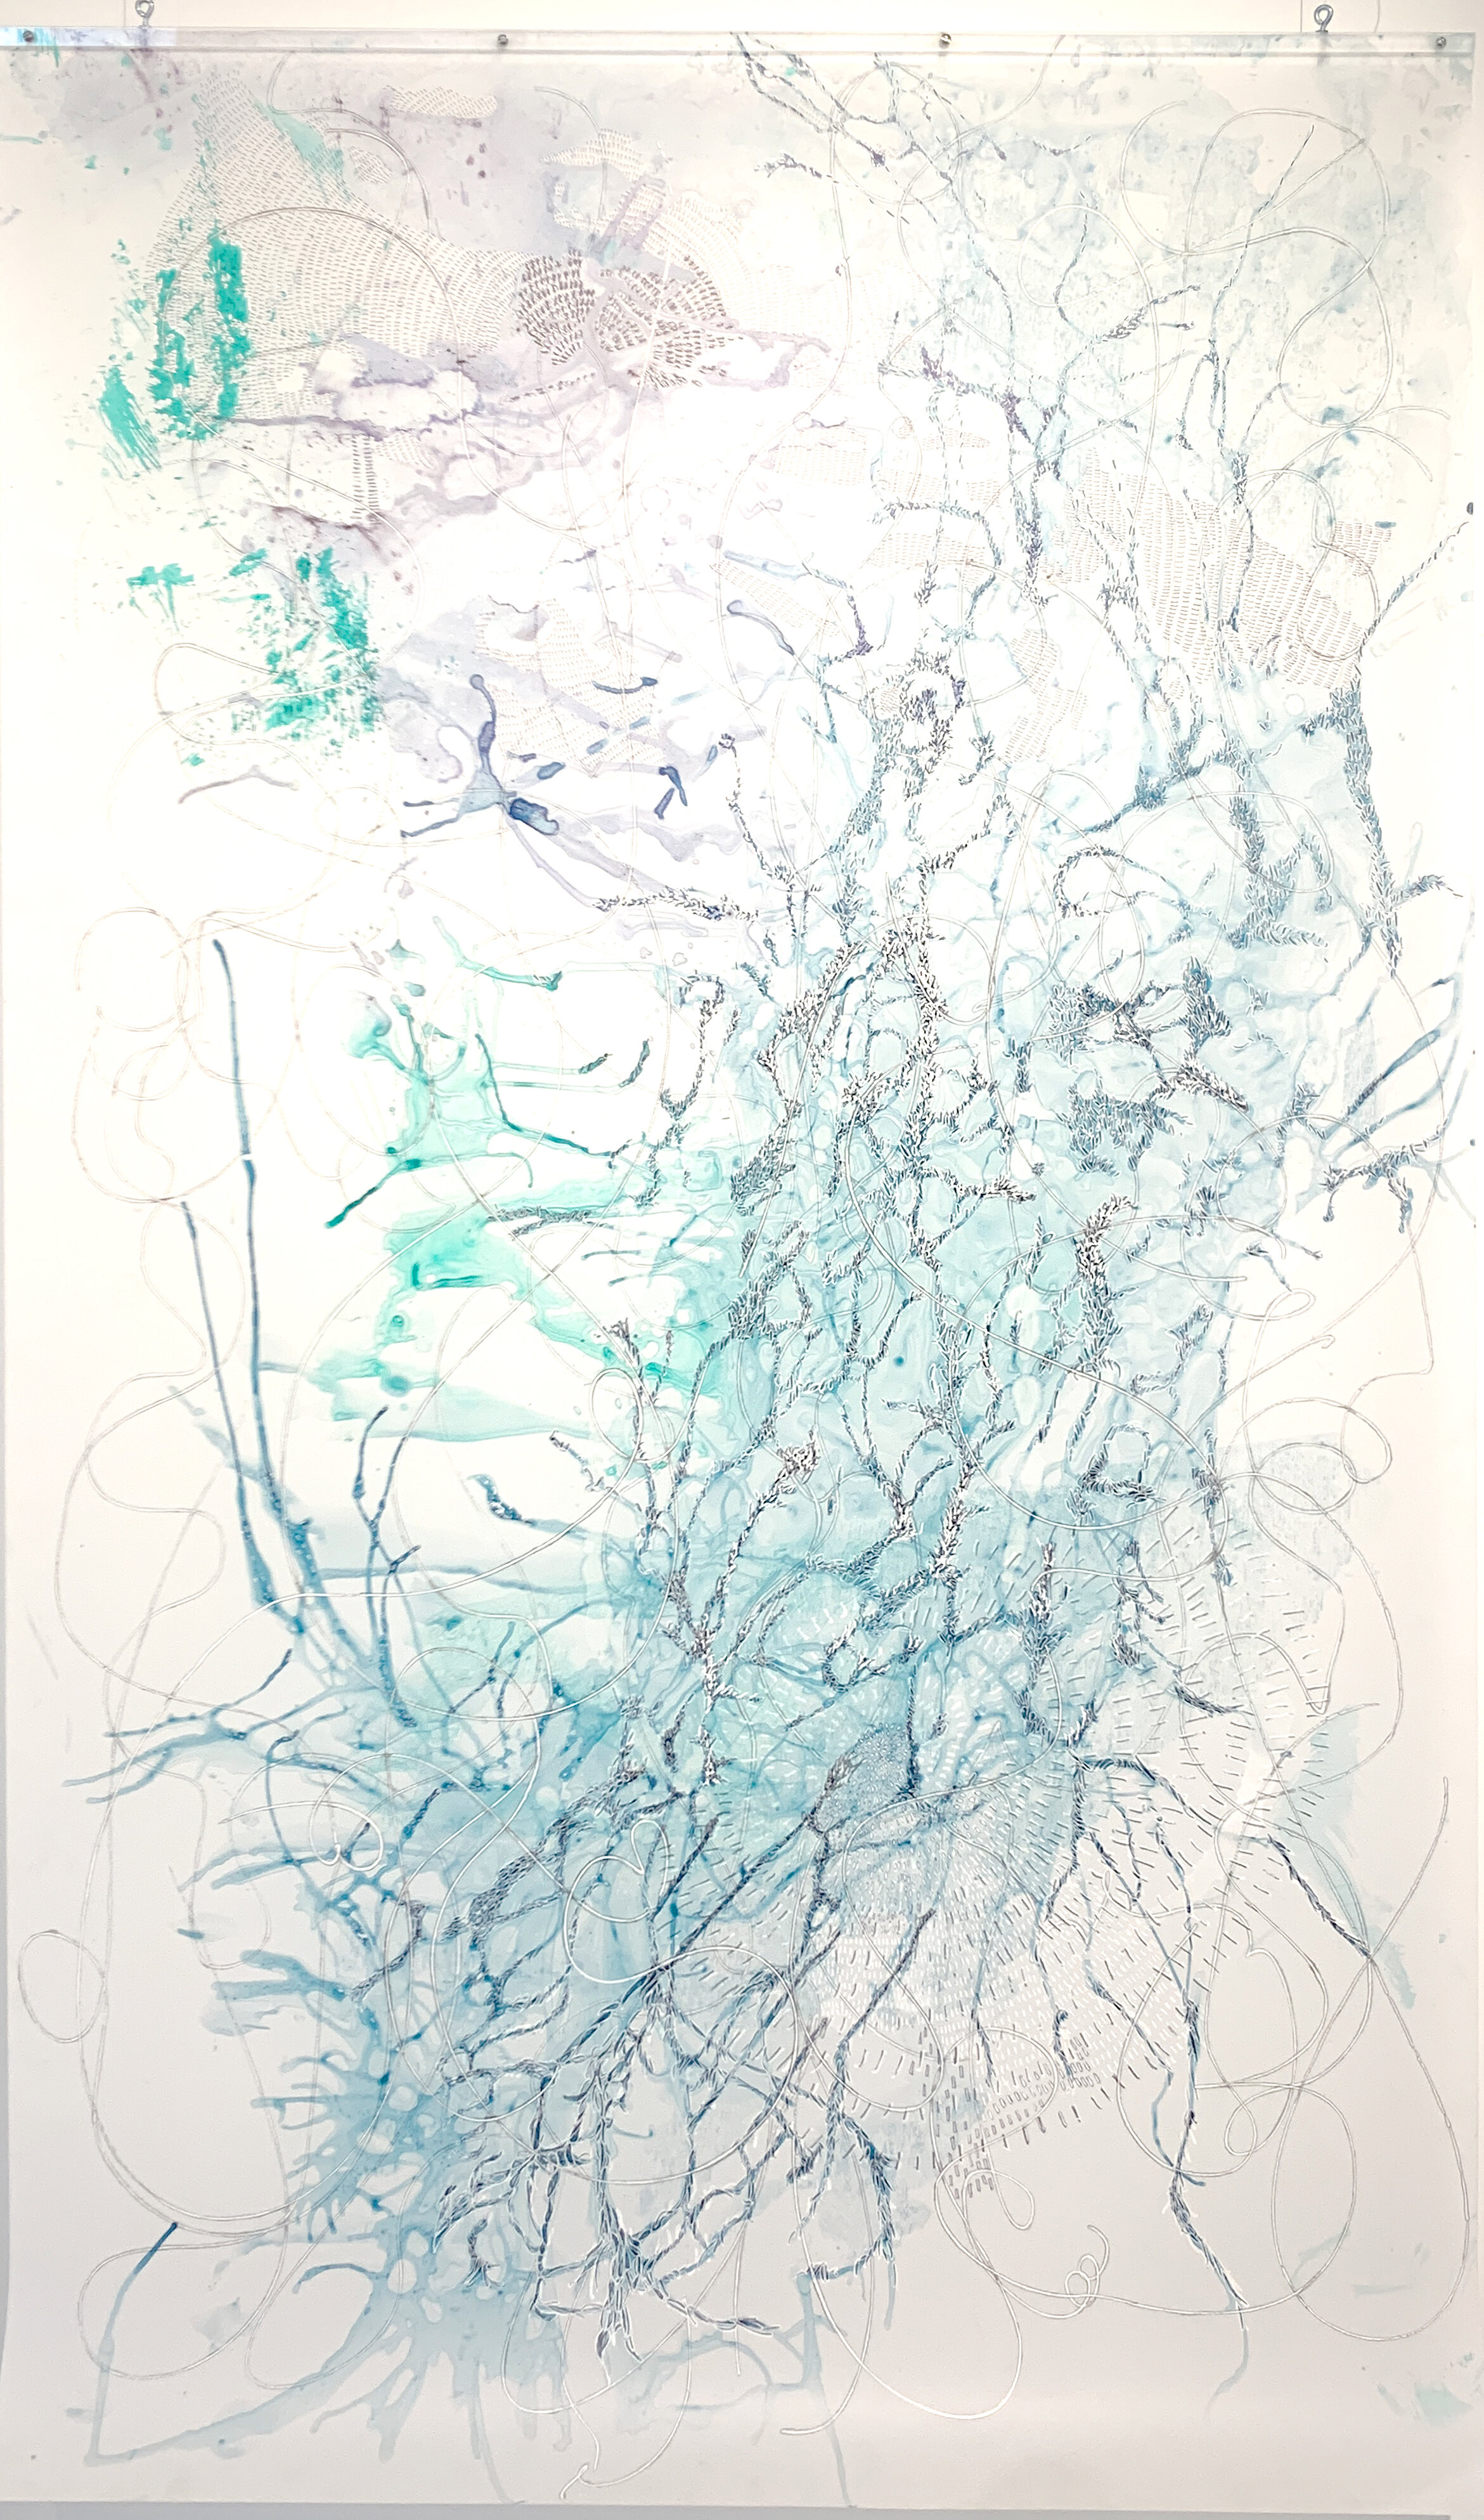    Connections: Mirage   ink, acrylic, graphite on vellum, 65 x 40 inches 